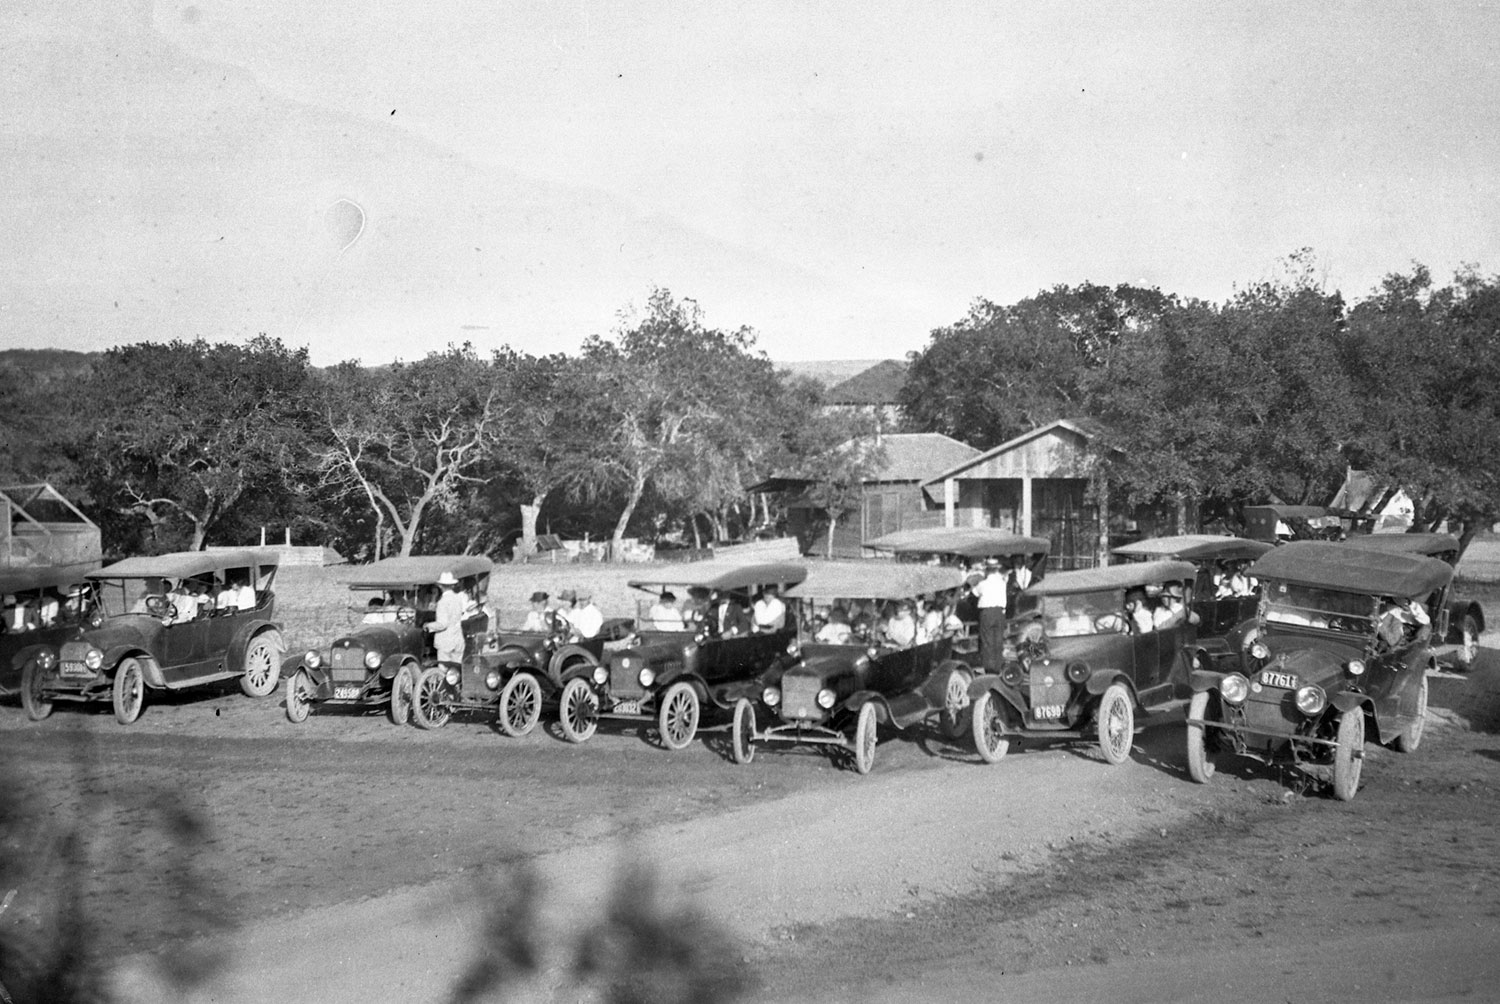 automobiles in the 1920s in Bryan.